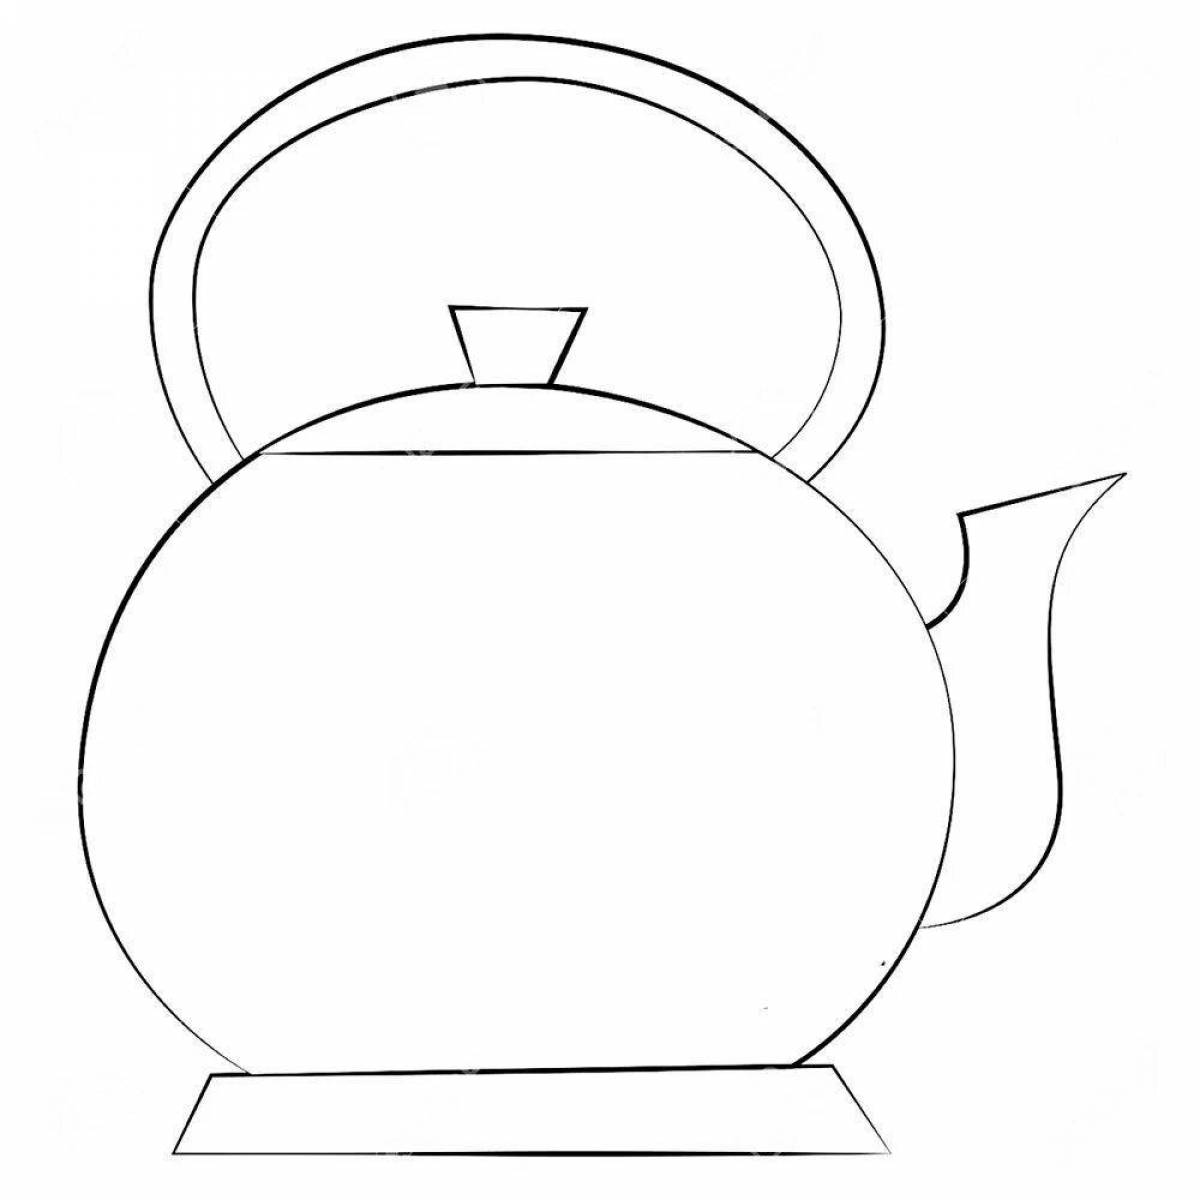 Wonderful teapot coloring book for students